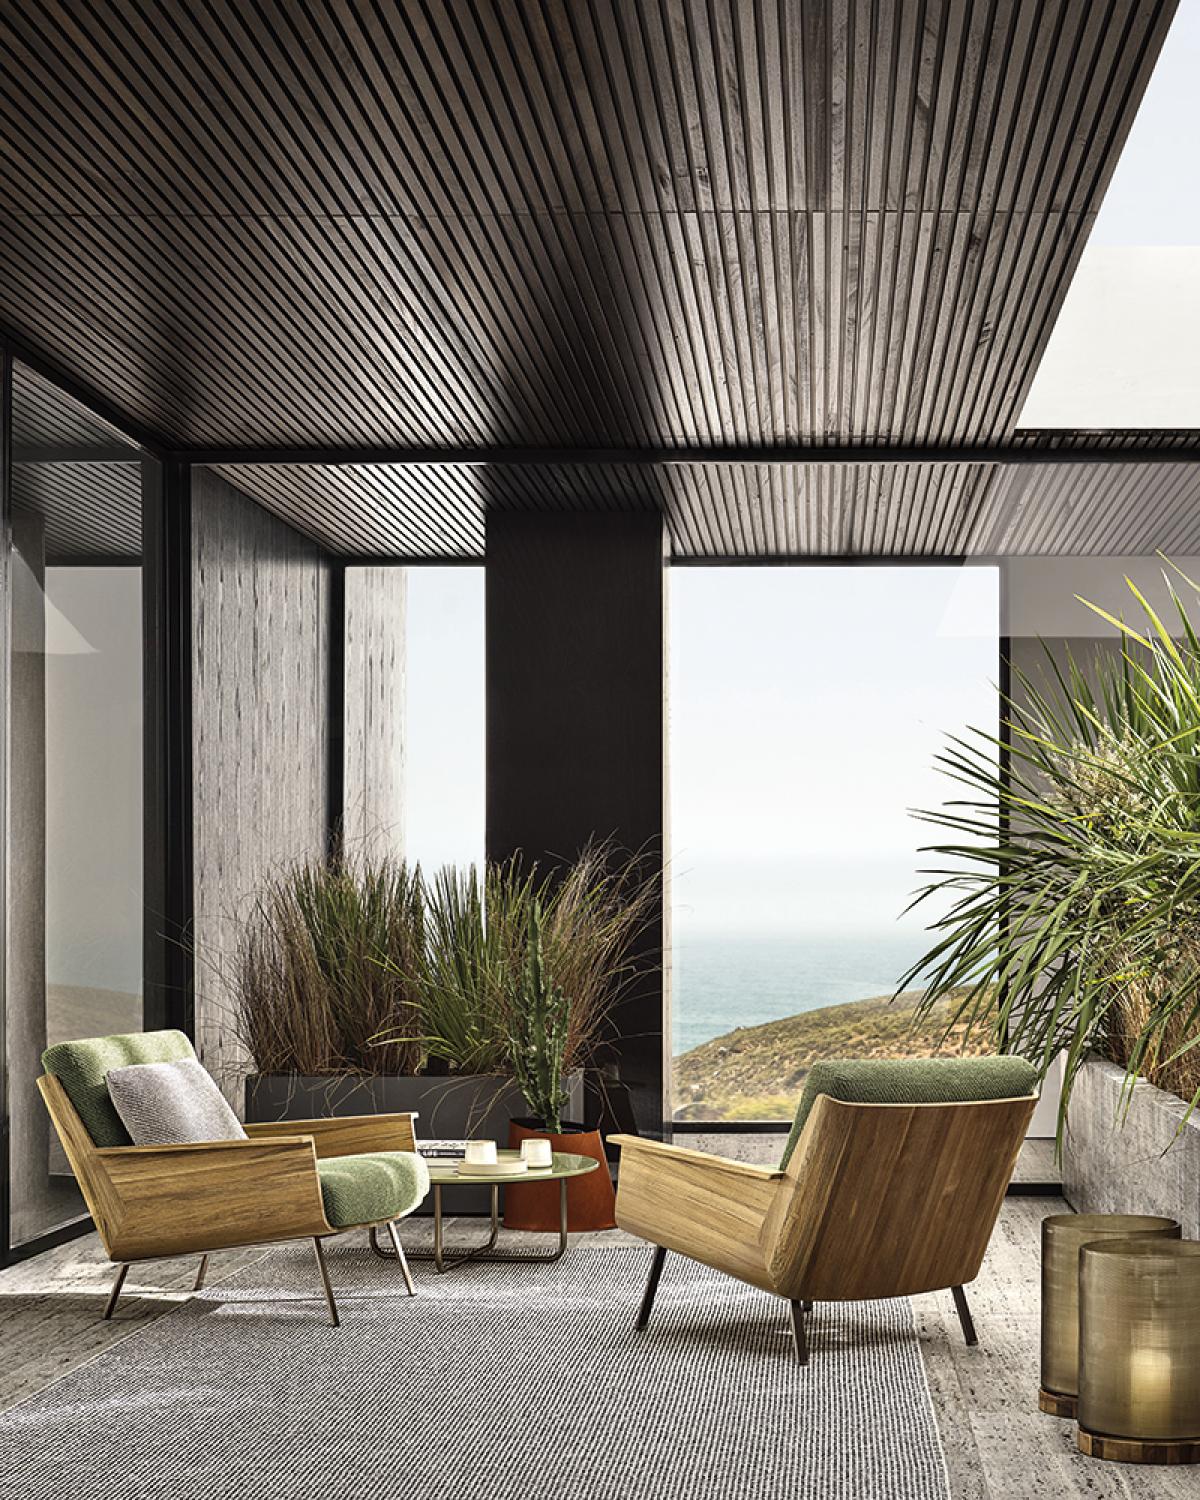 Minotti designs fluid indoor and outdoor living spaces  - image 5